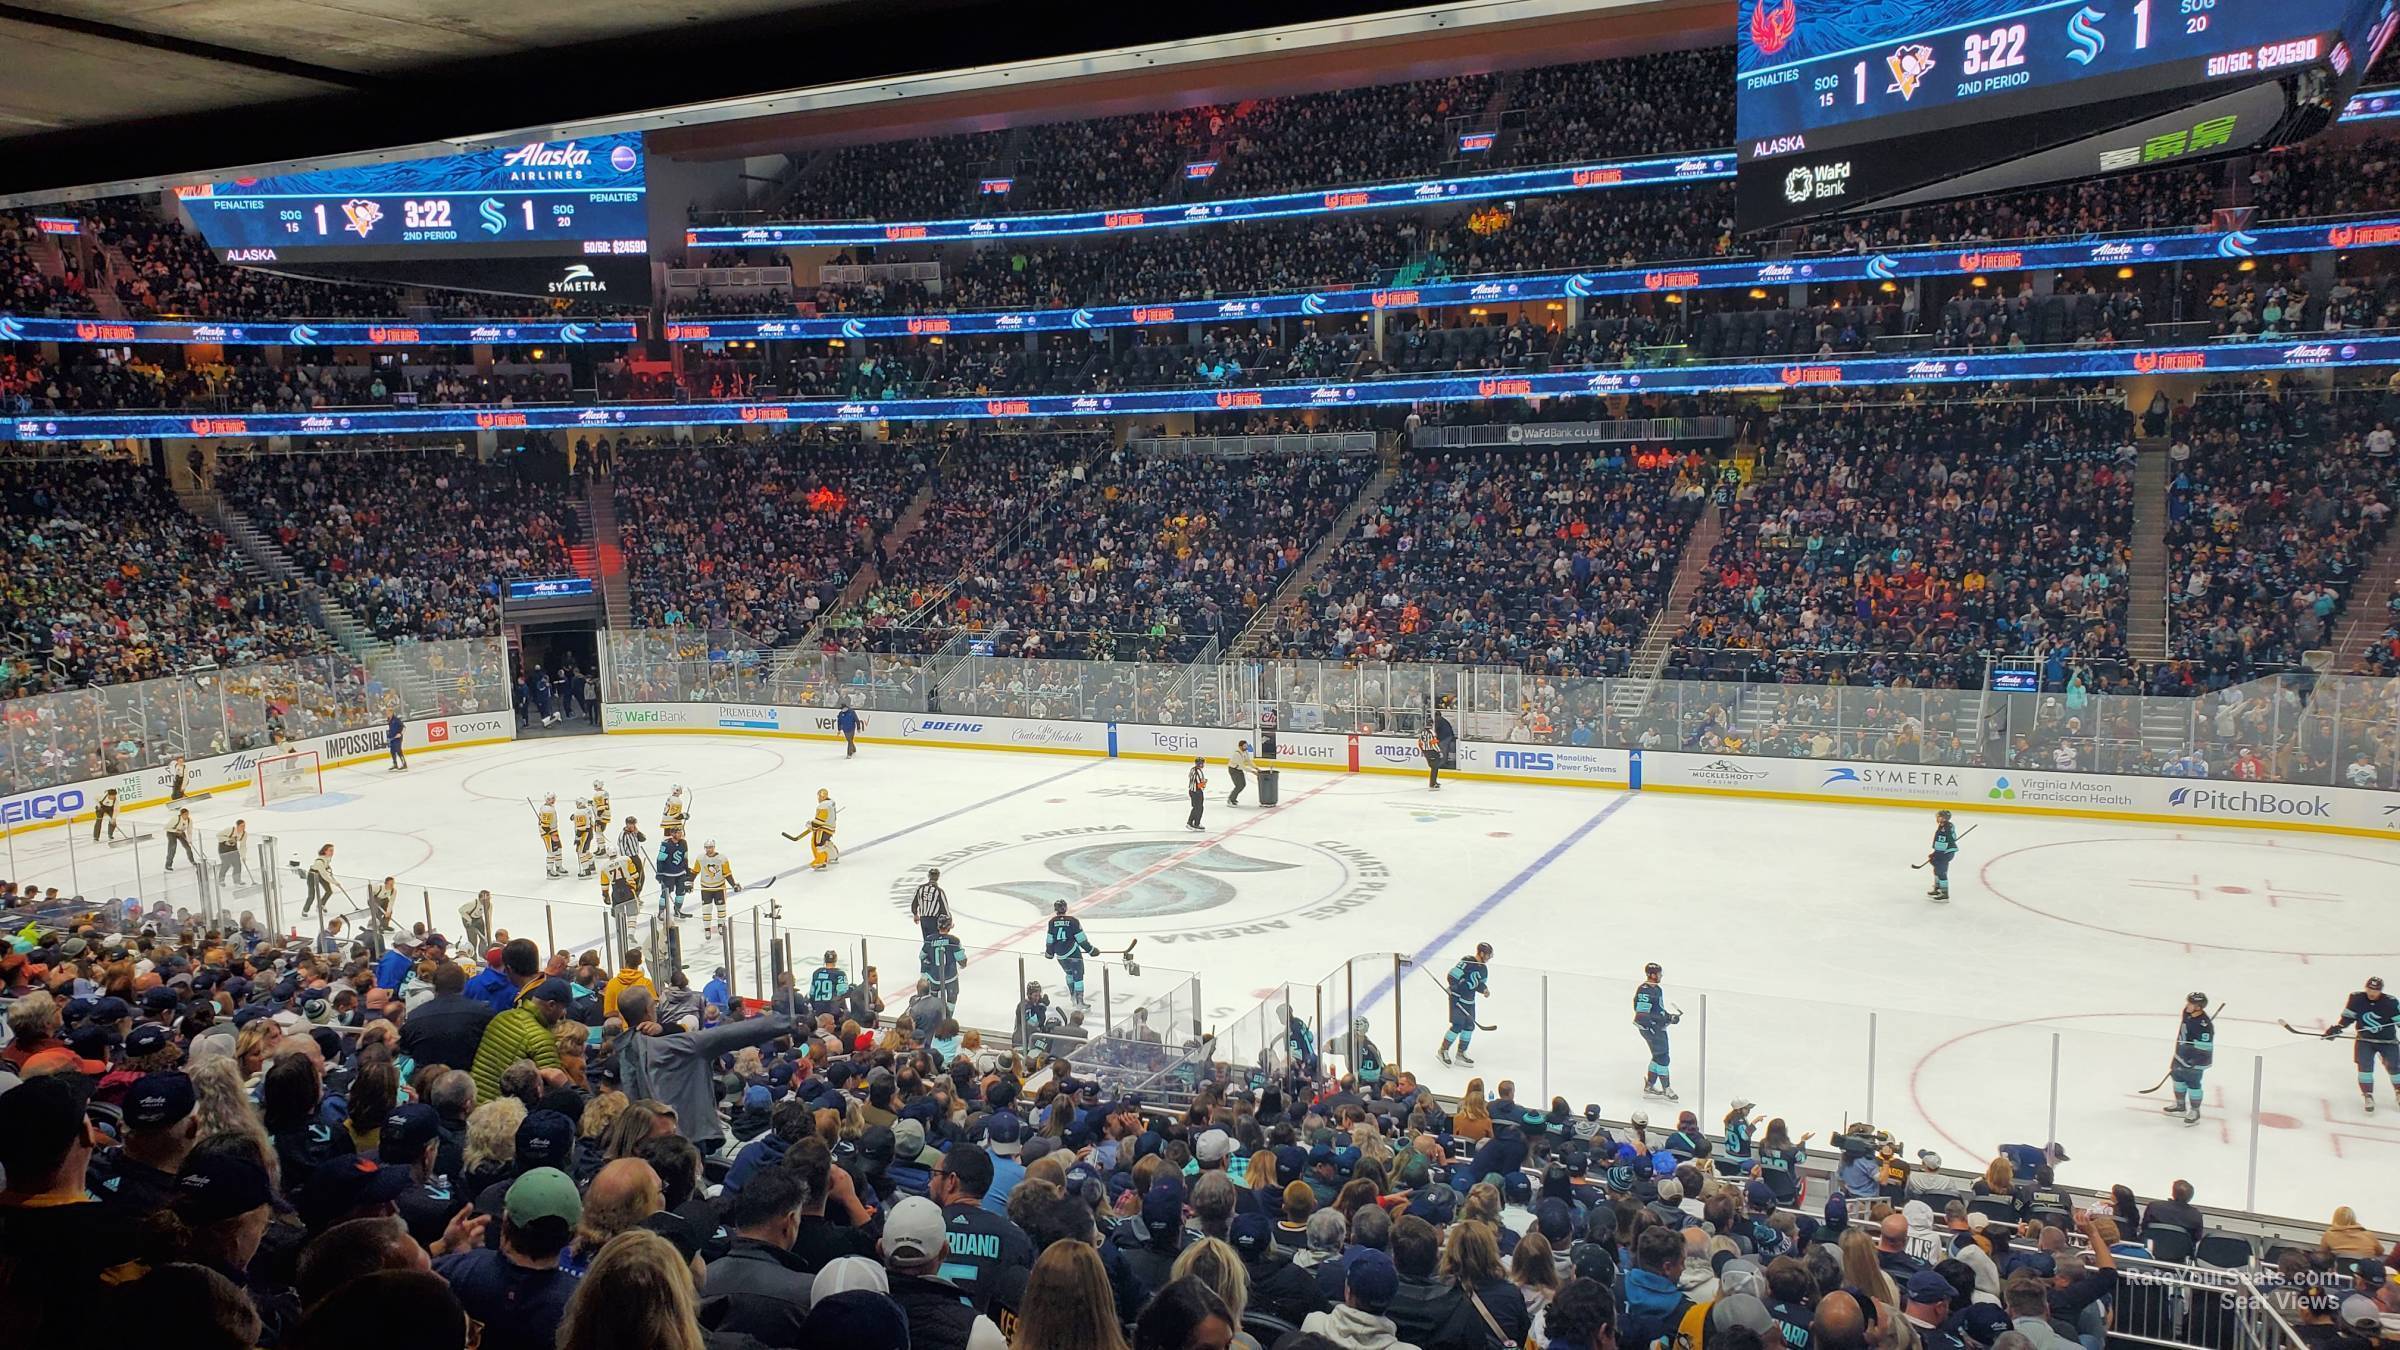 club 26, row bar seat view  for hockey - climate pledge arena